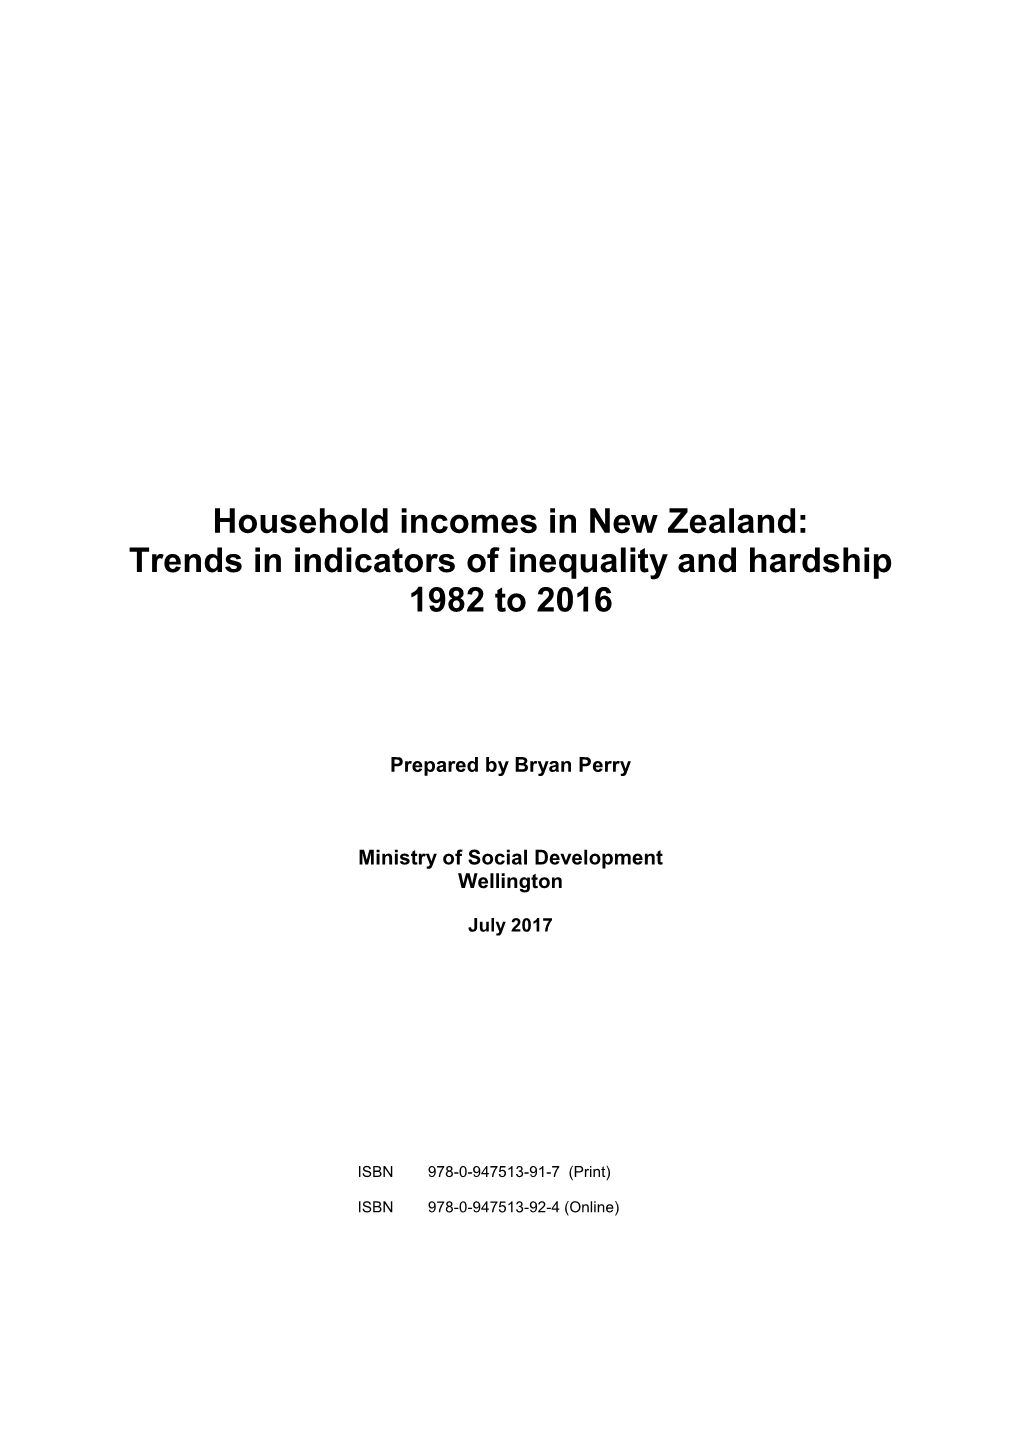 Household Incomes in New Zealand: Trends in Indicators of Inequality and Hardship 1982 to 2016